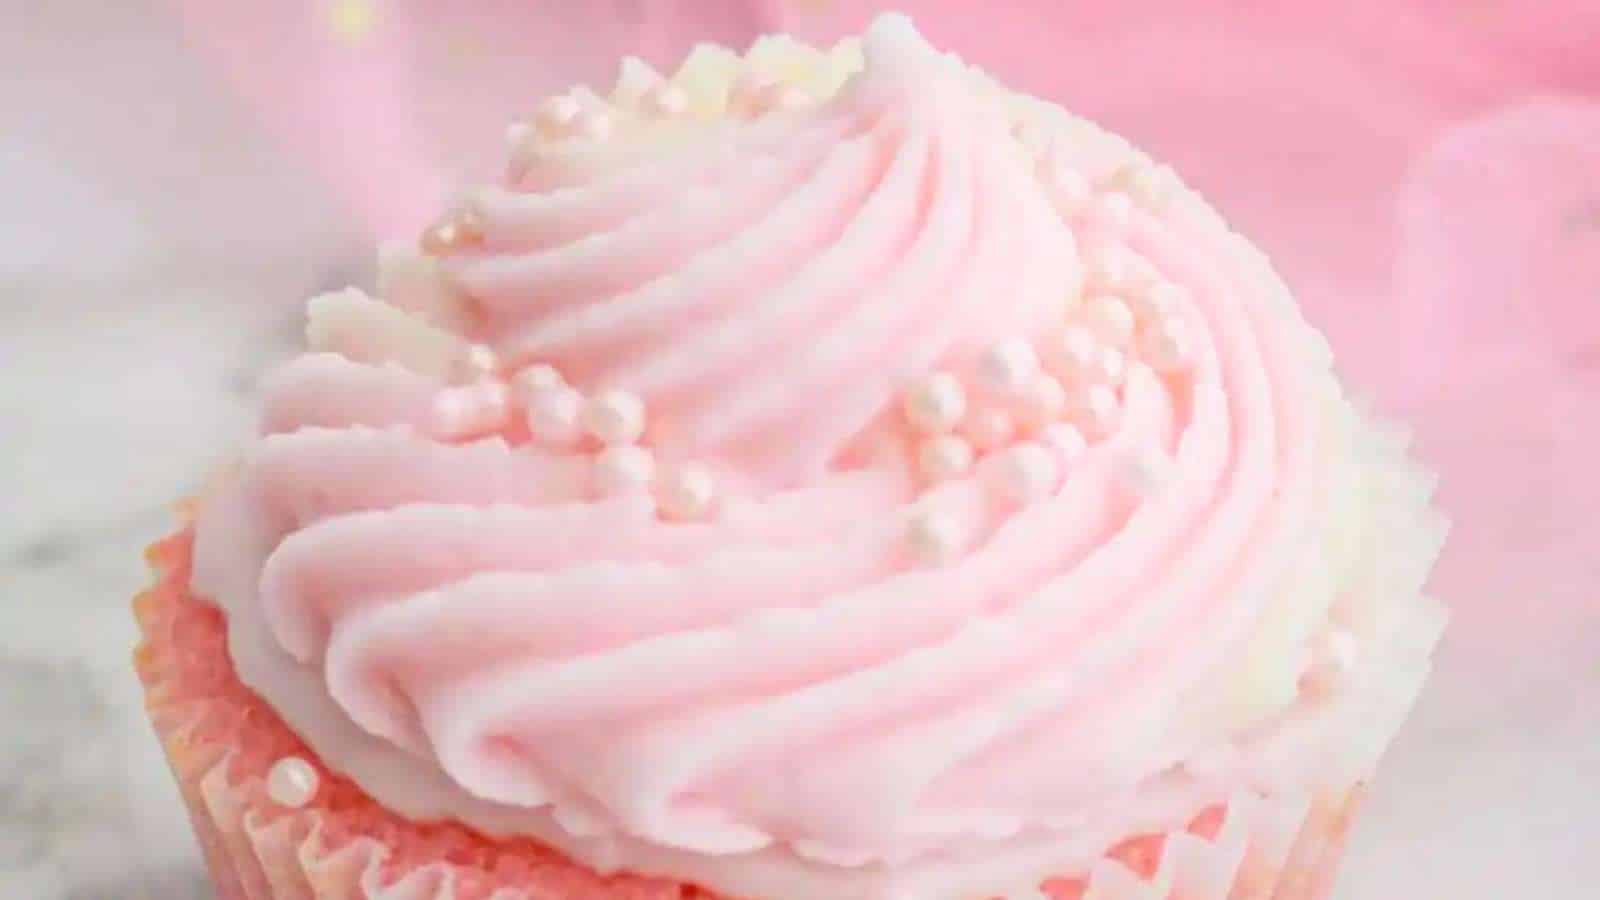 A close up of a pink frosted cupcake.